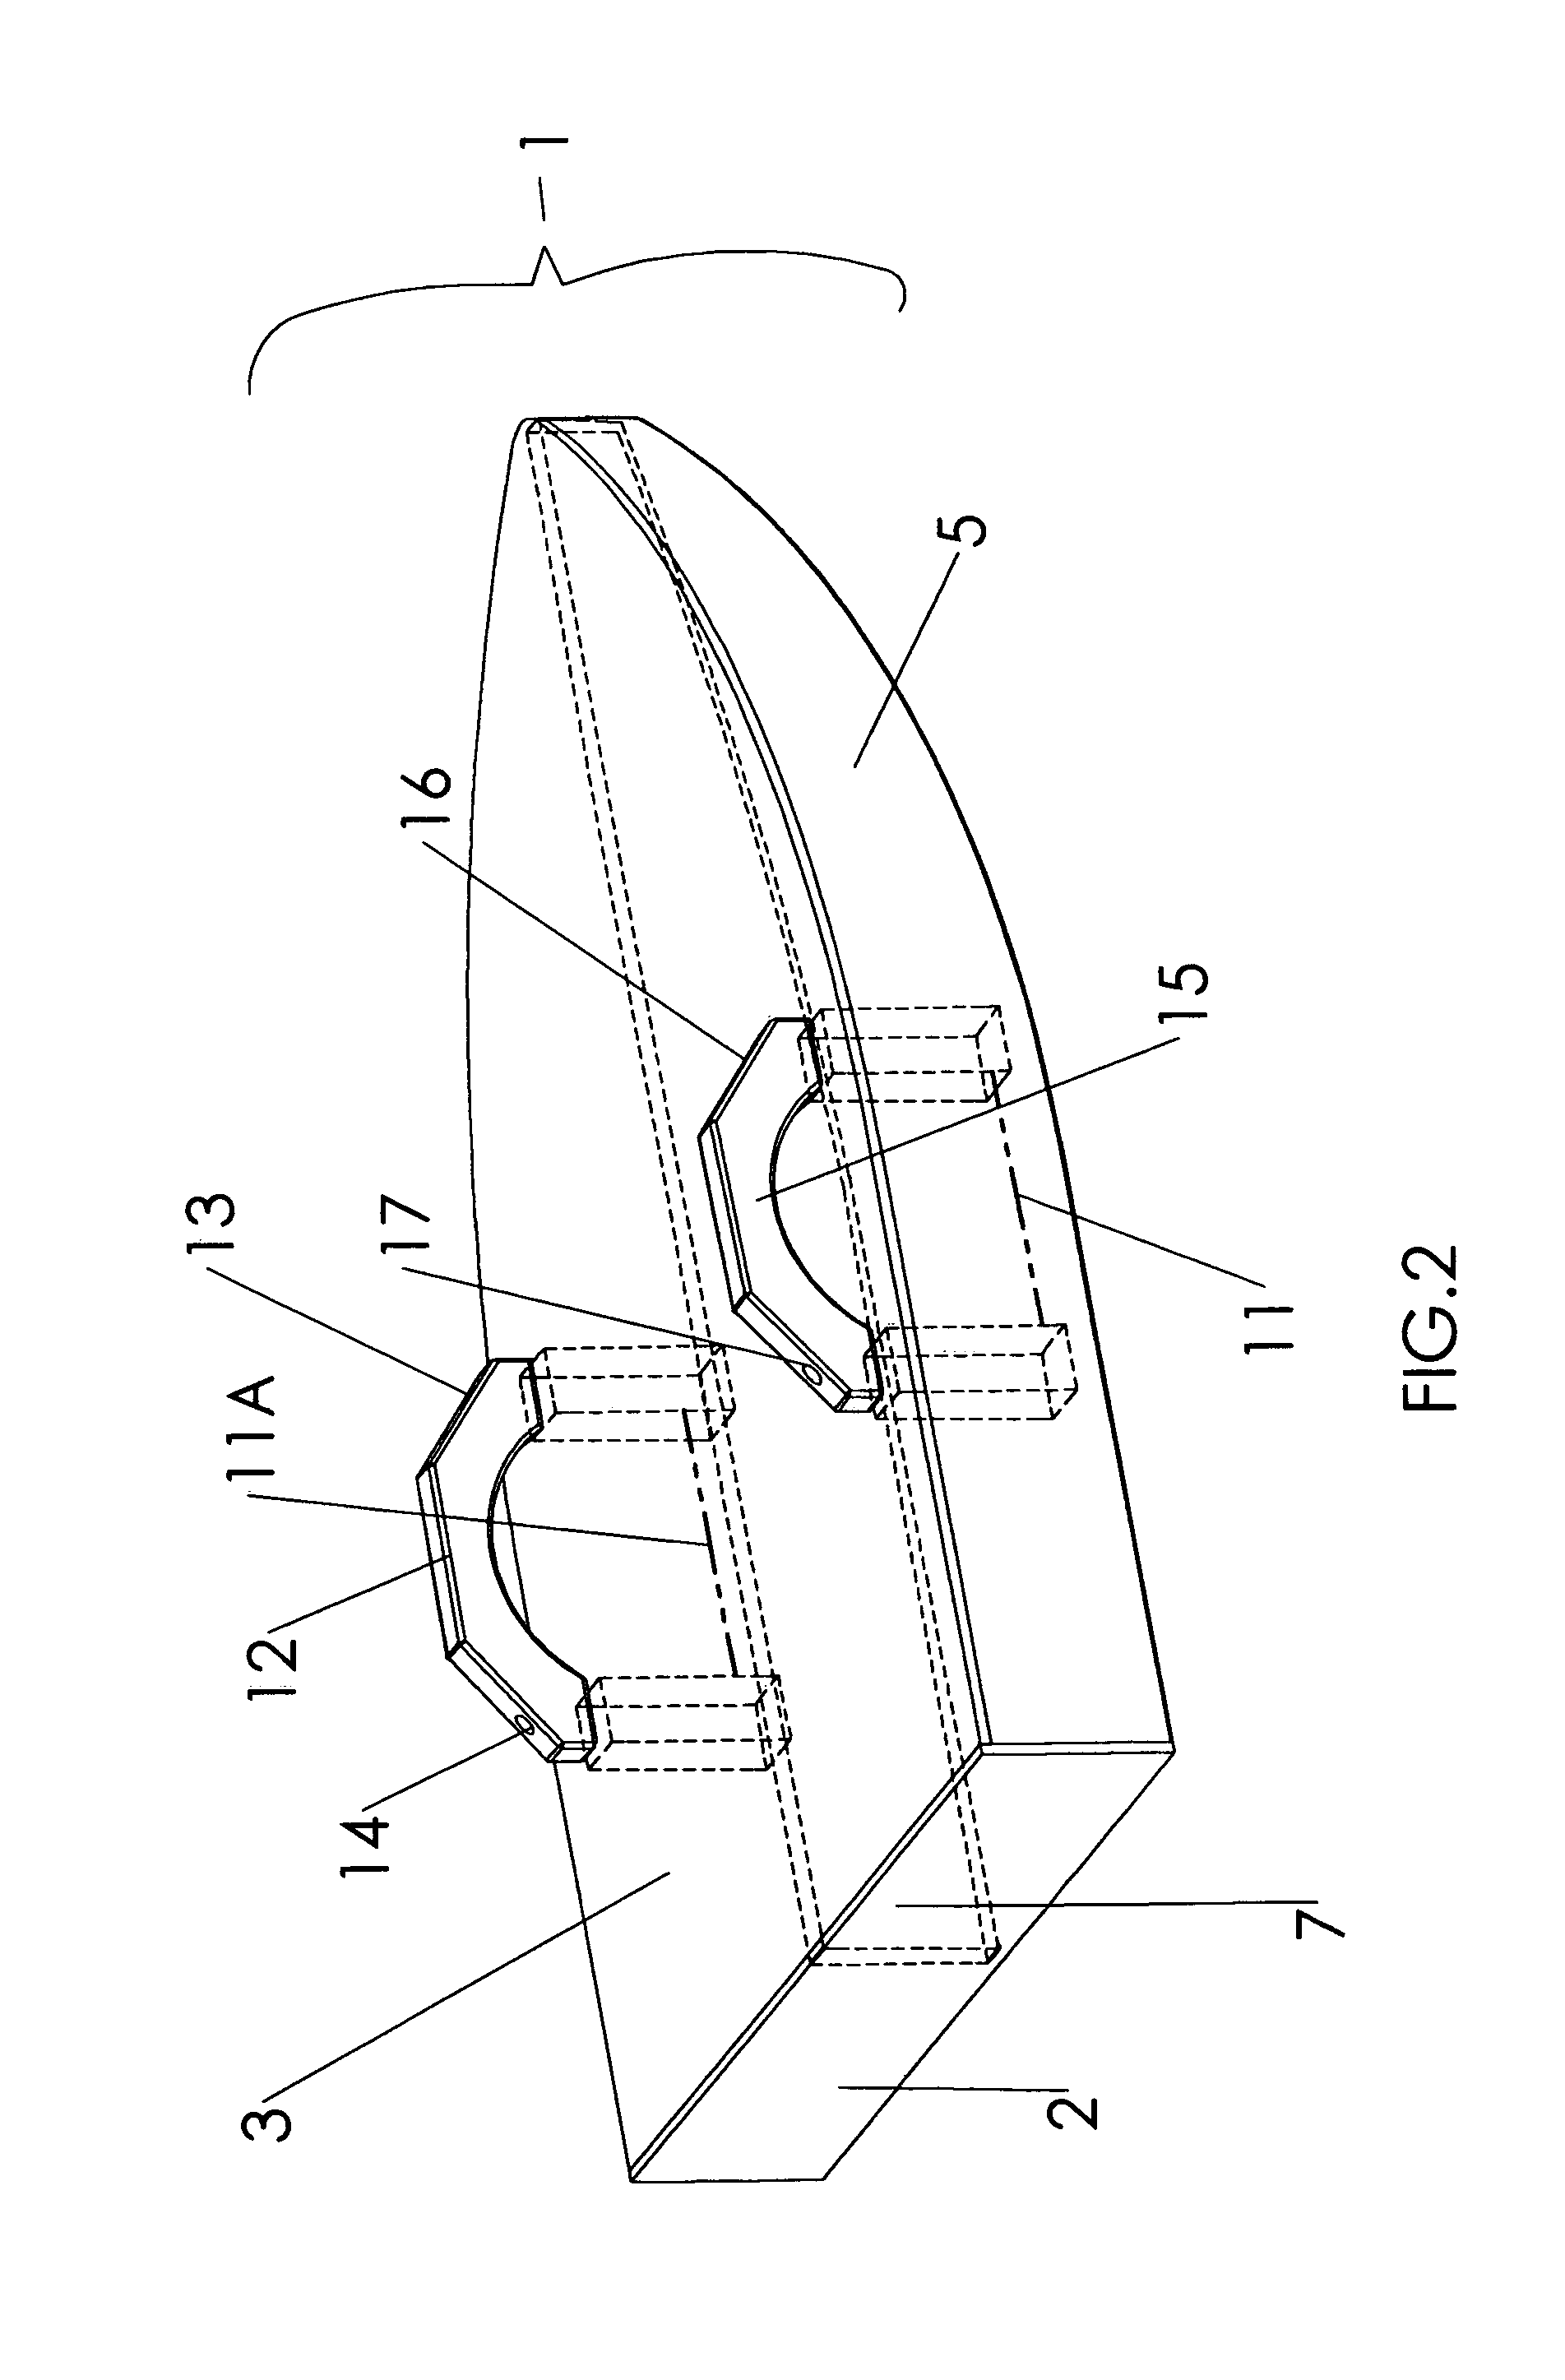 Device for steering a toboggan